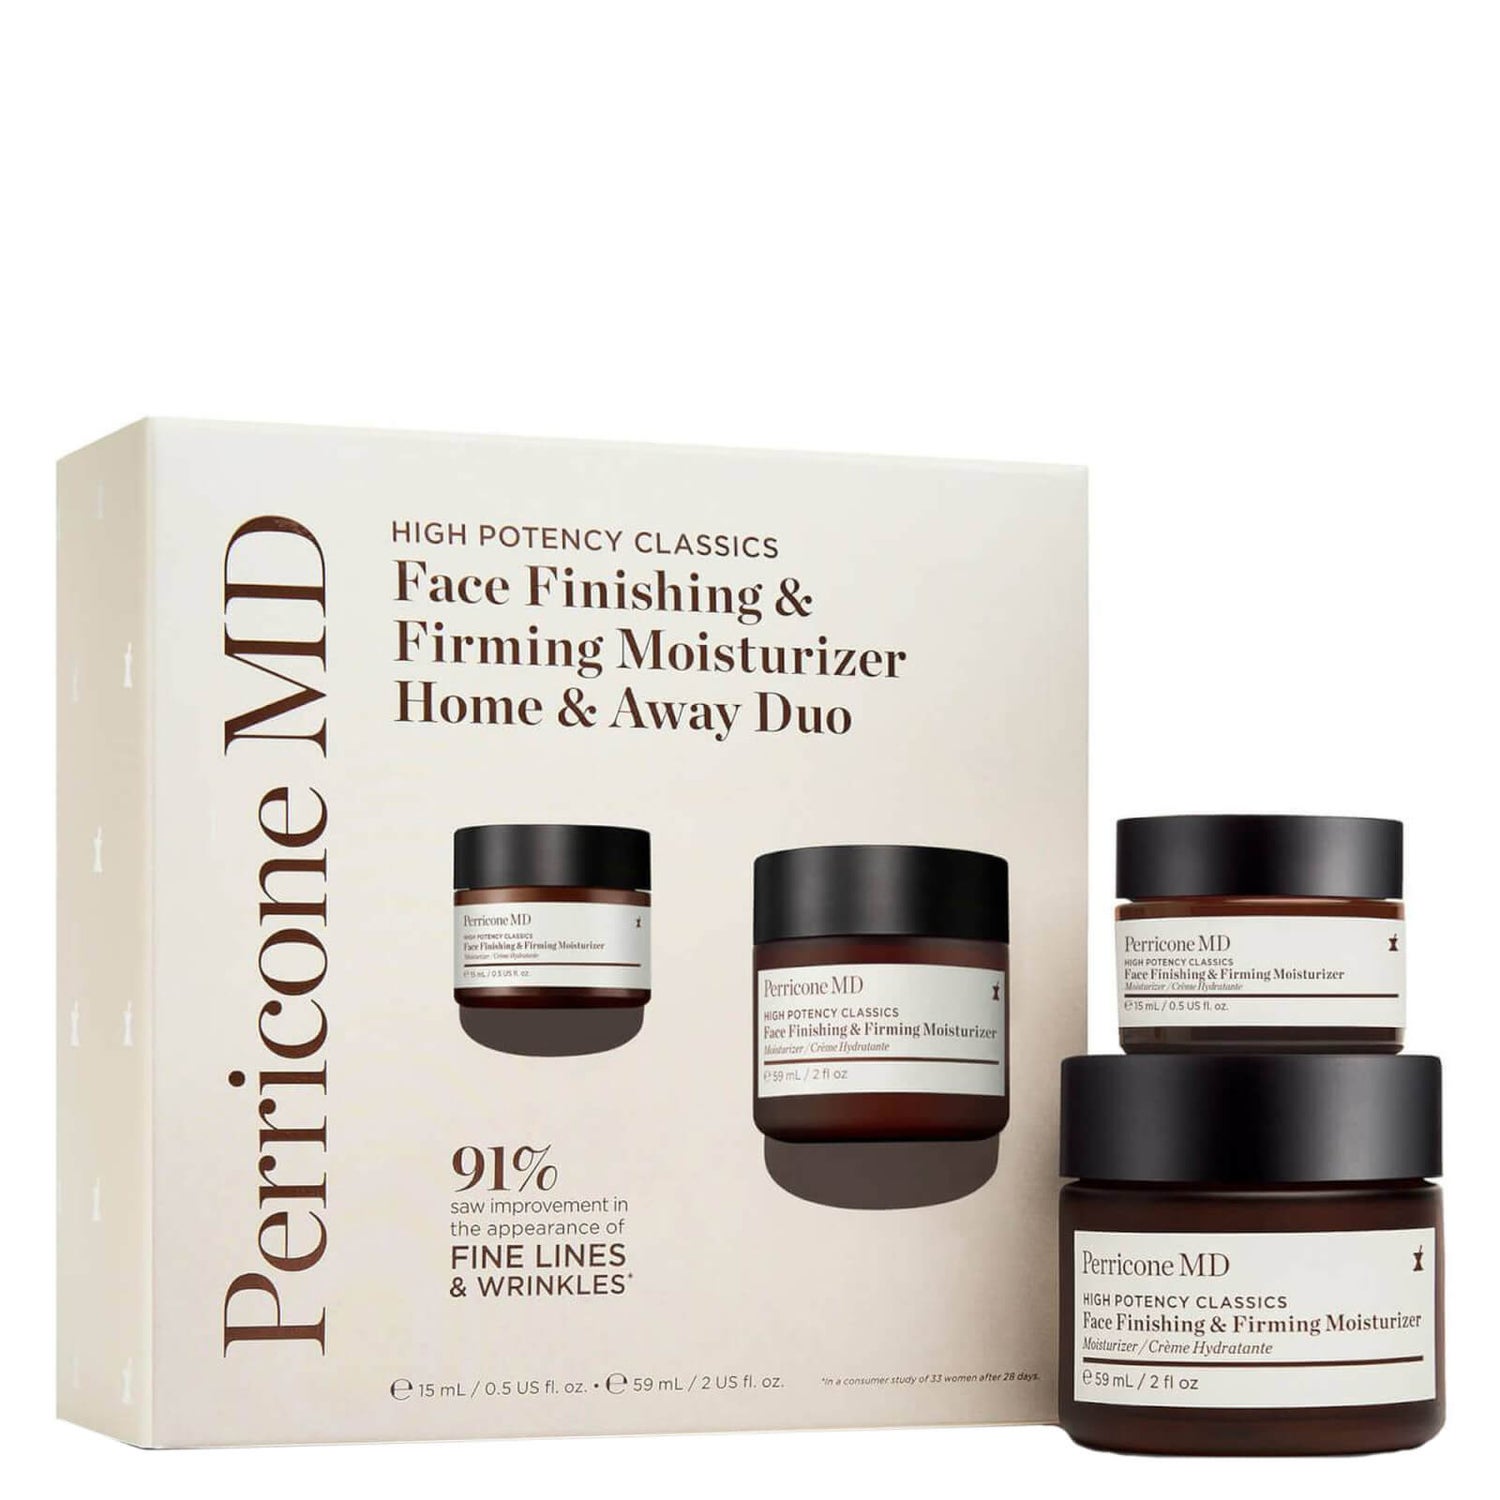 Perricone MD High Potency Classics Face Finishing and Firming Moisturizer Home and Away Duo (Worth £78.00)